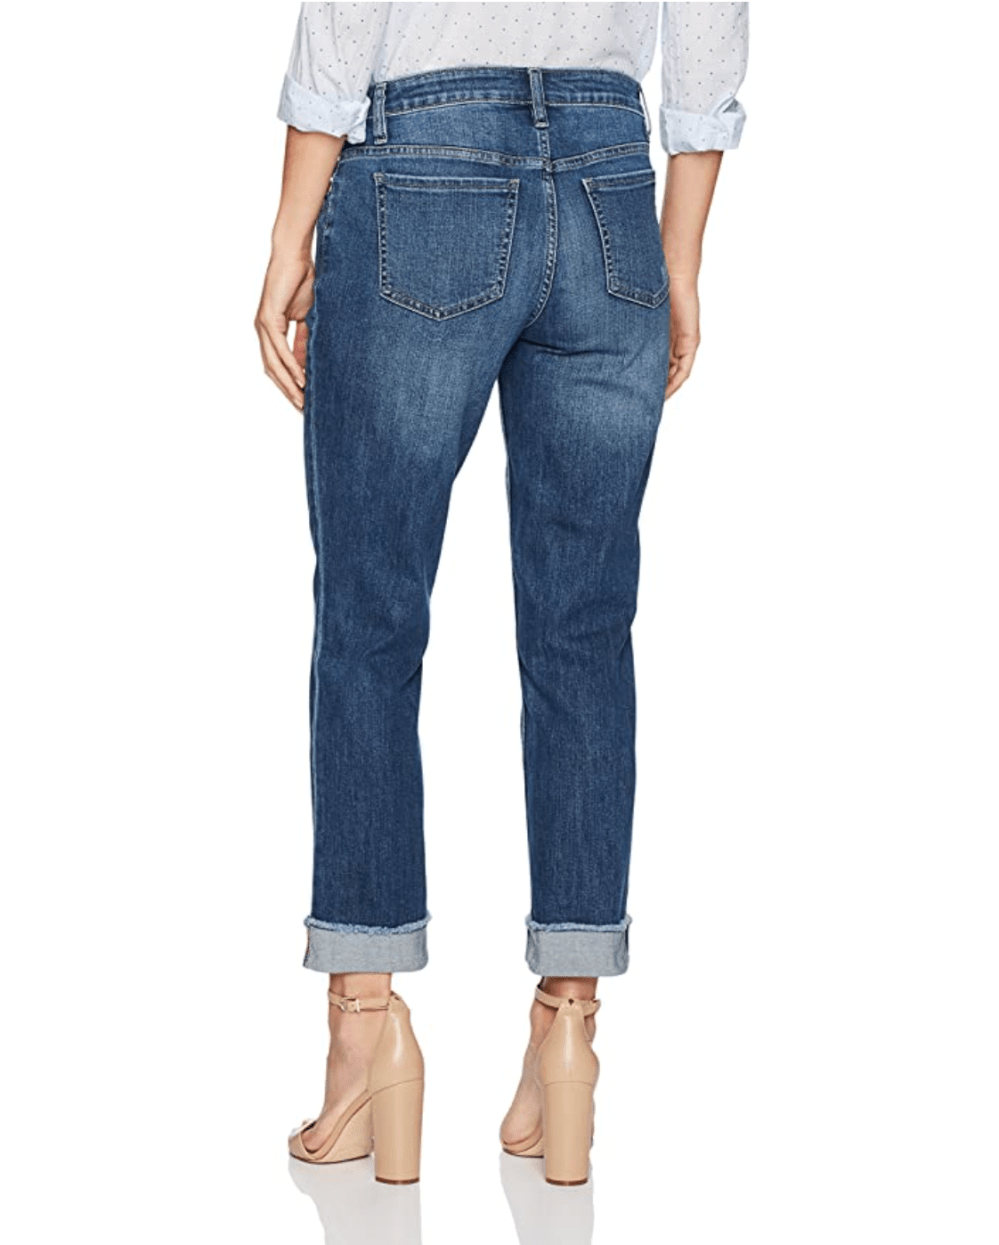 Lee Boyfriend Jeans From Amazon Are a Must-Have for Spring | Us Weekly